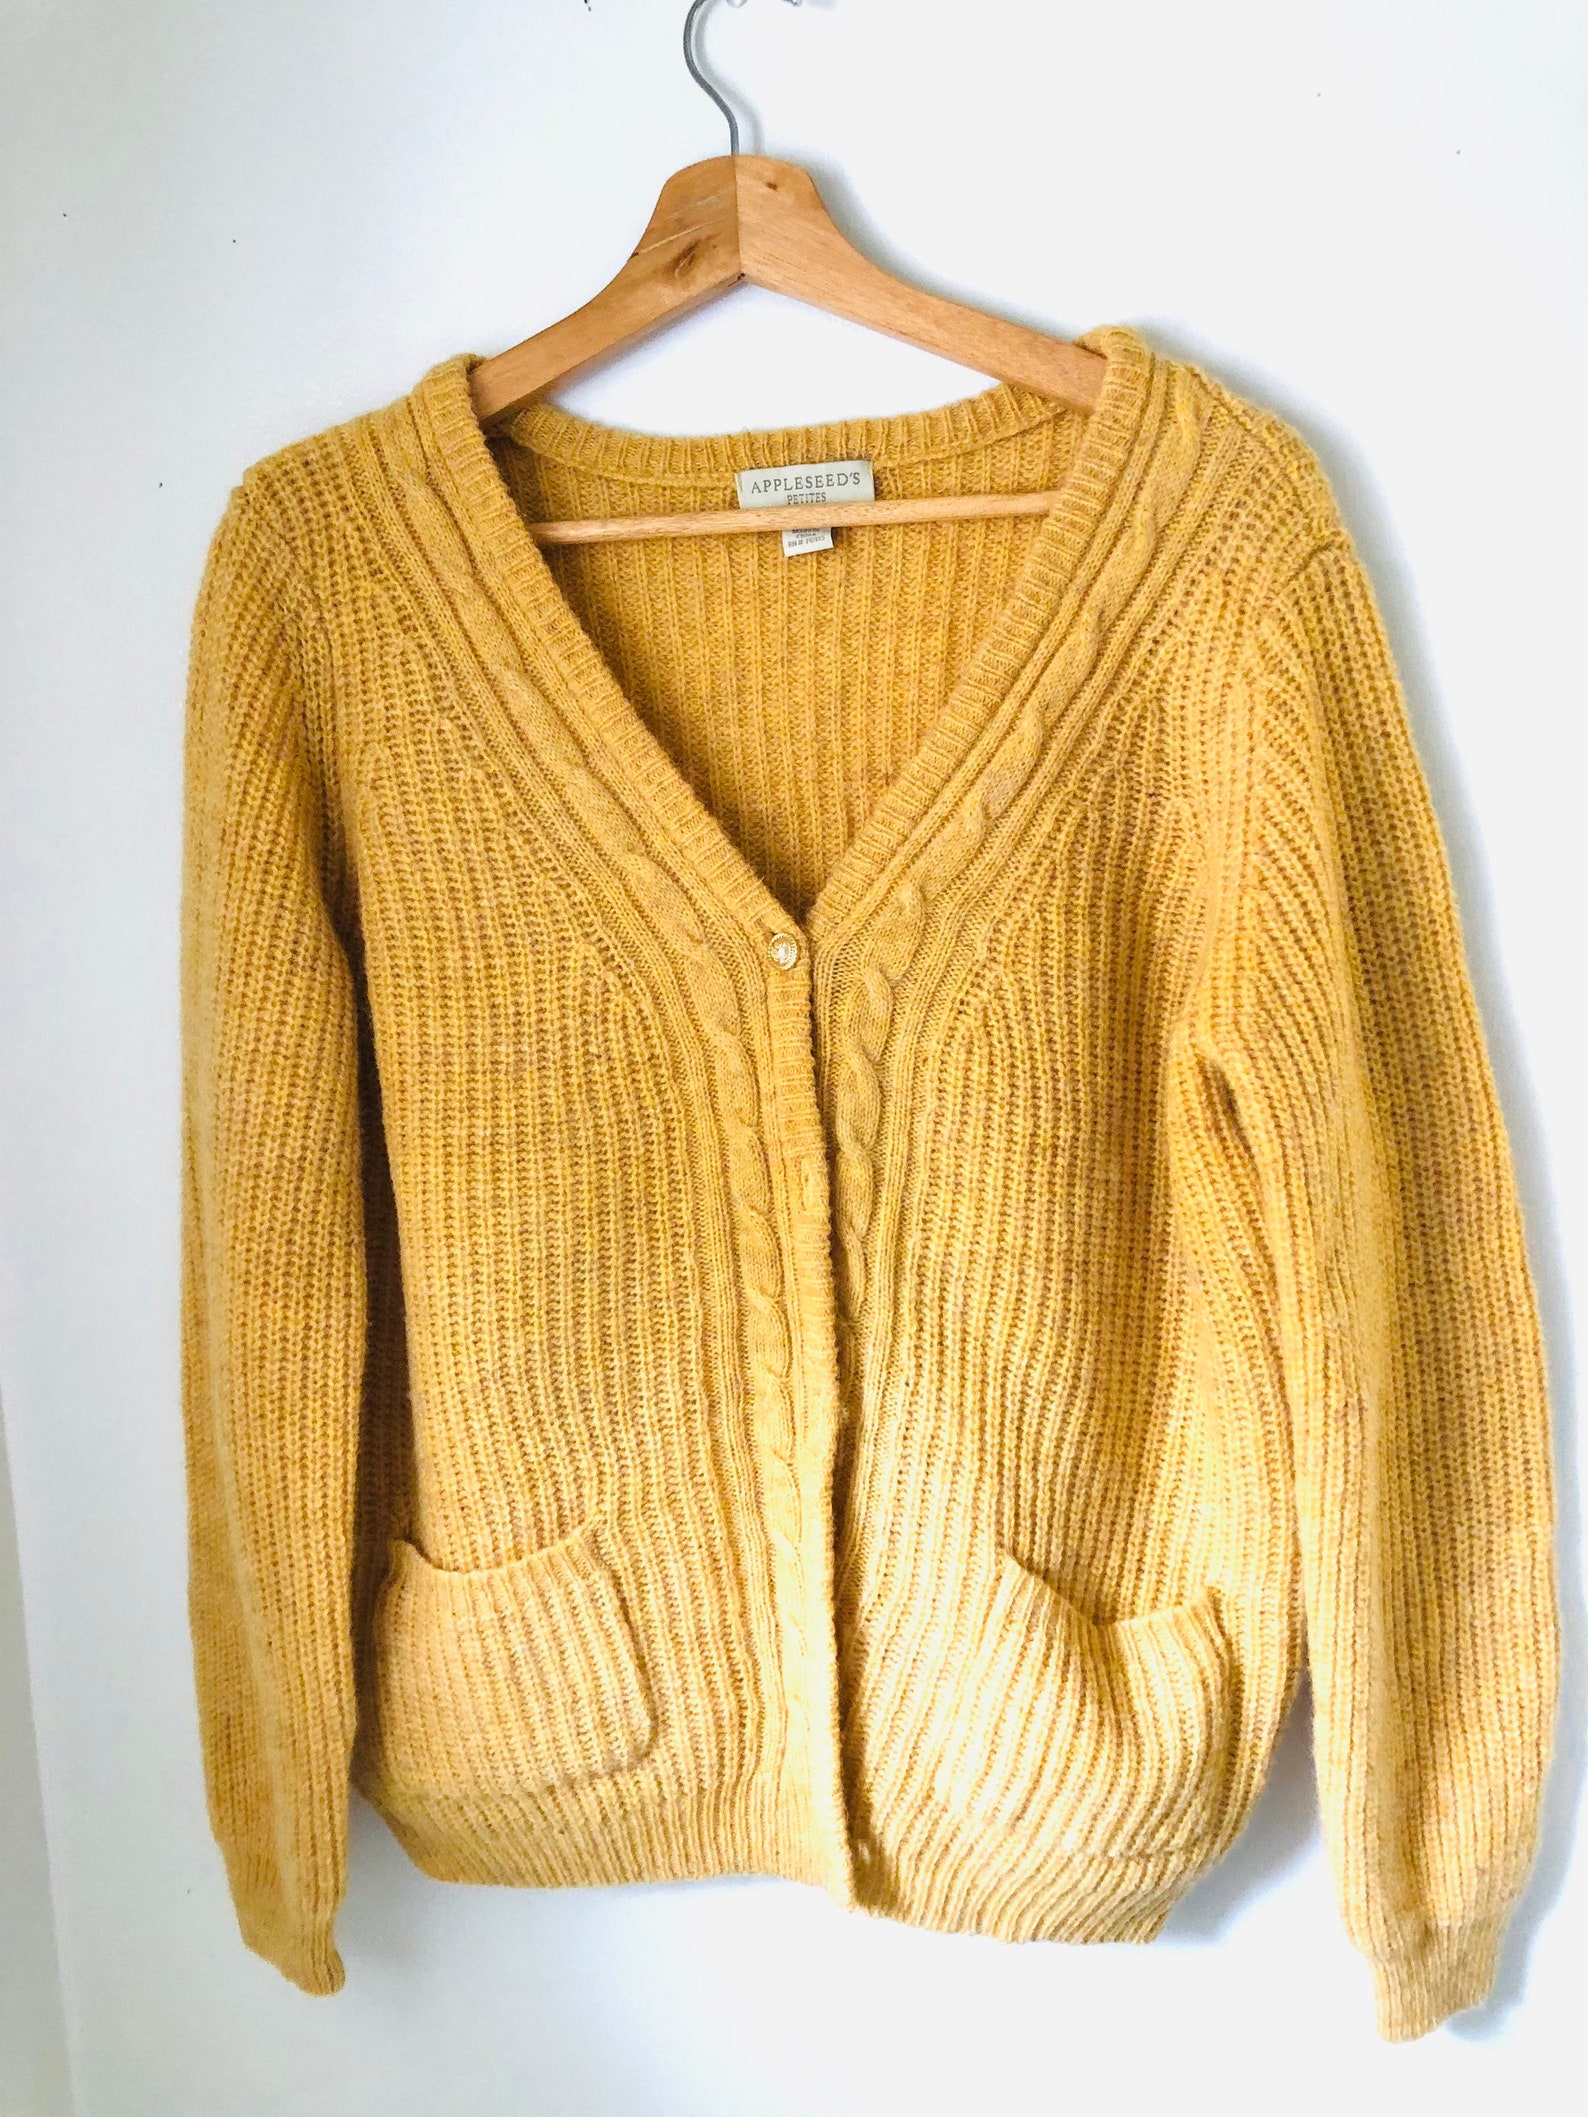 Vintage Gold Button Wool Cardigan | Etsy